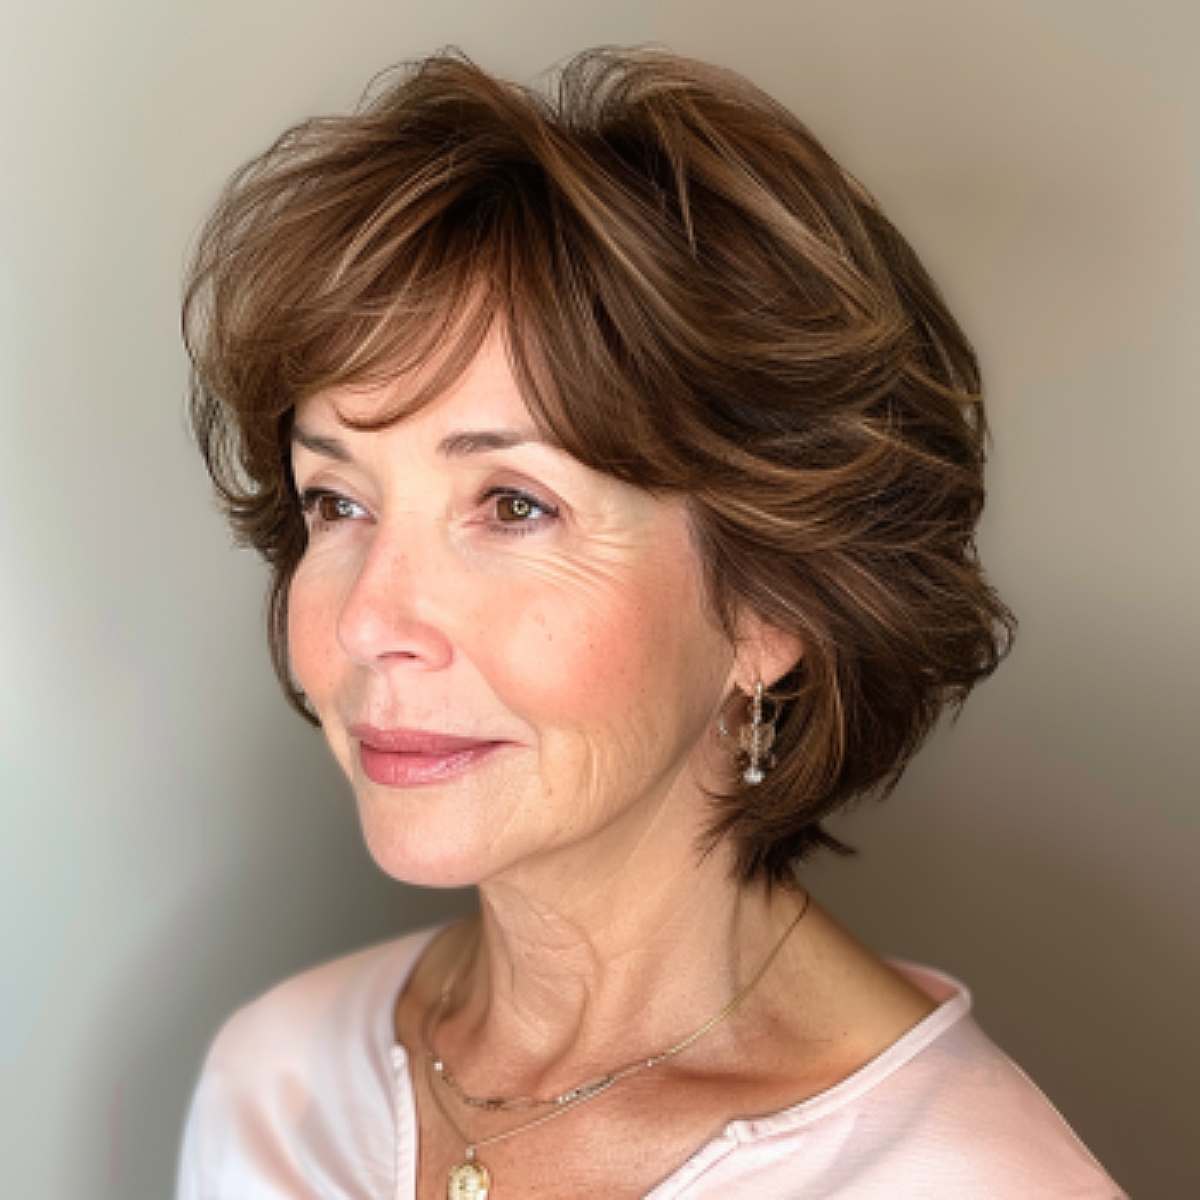 Short haircut with wispy bangs for women over 50